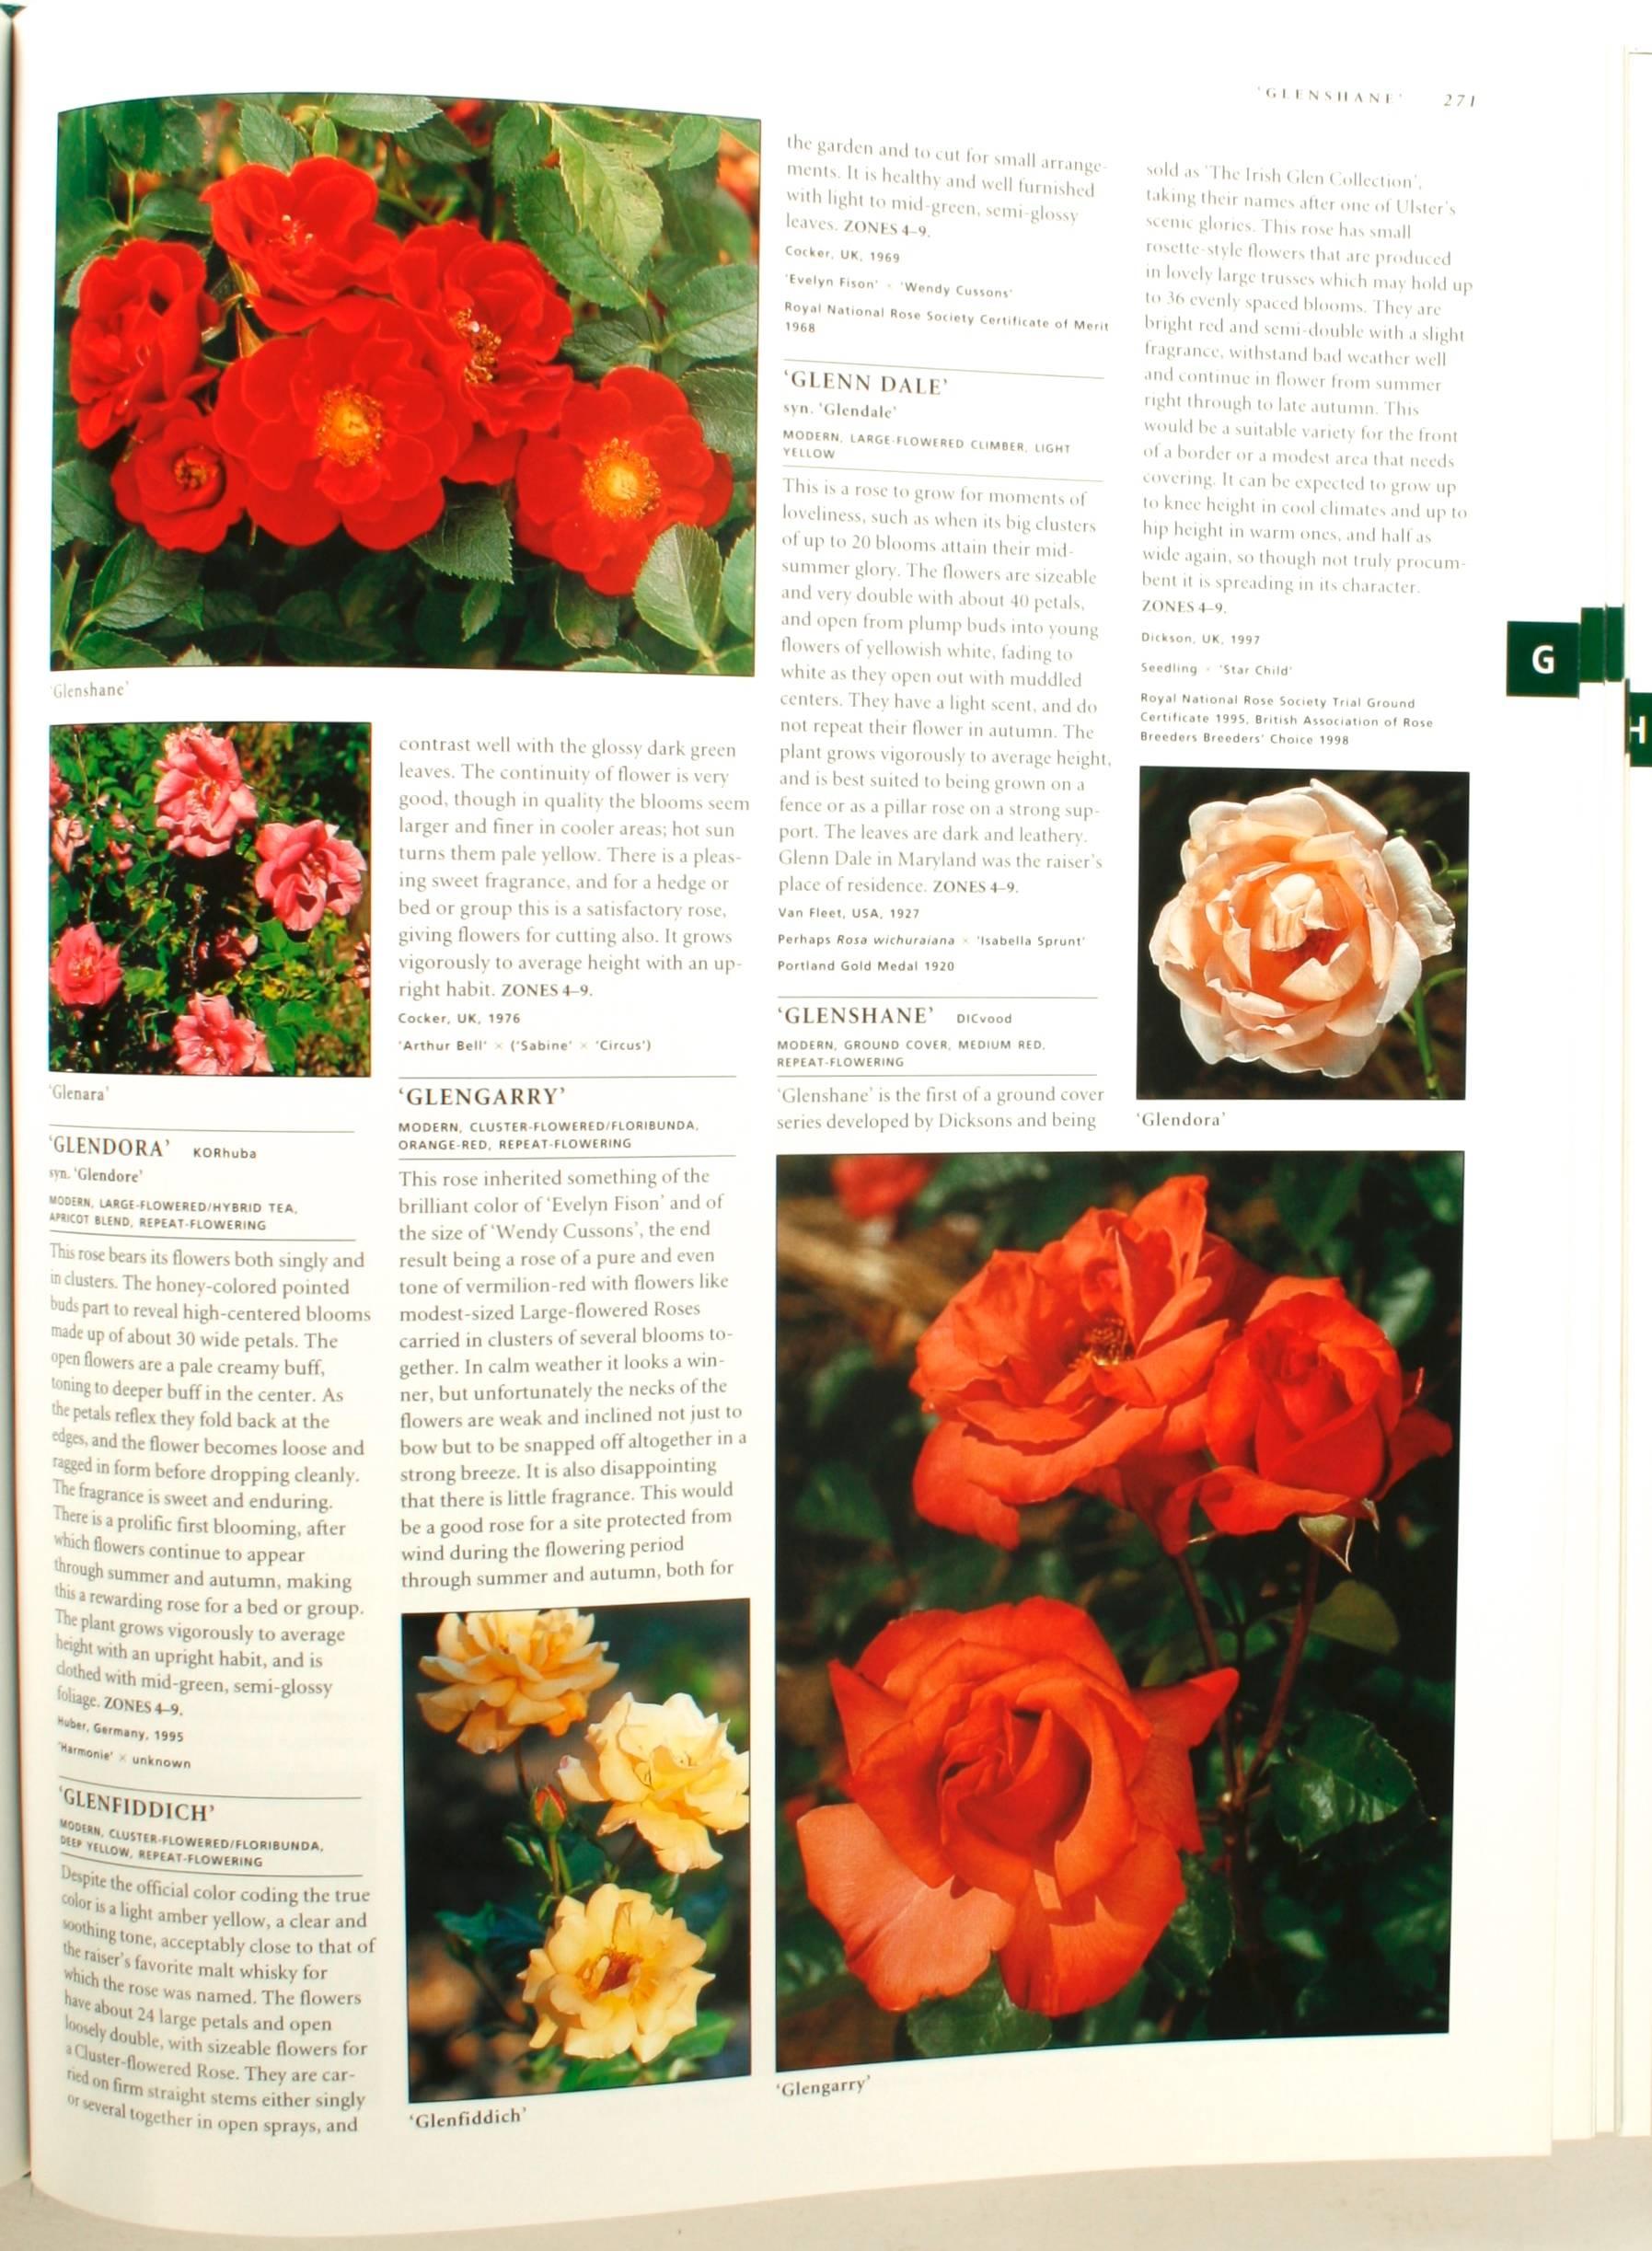 American Botanica's Roses, The Encyclopedia of Roses